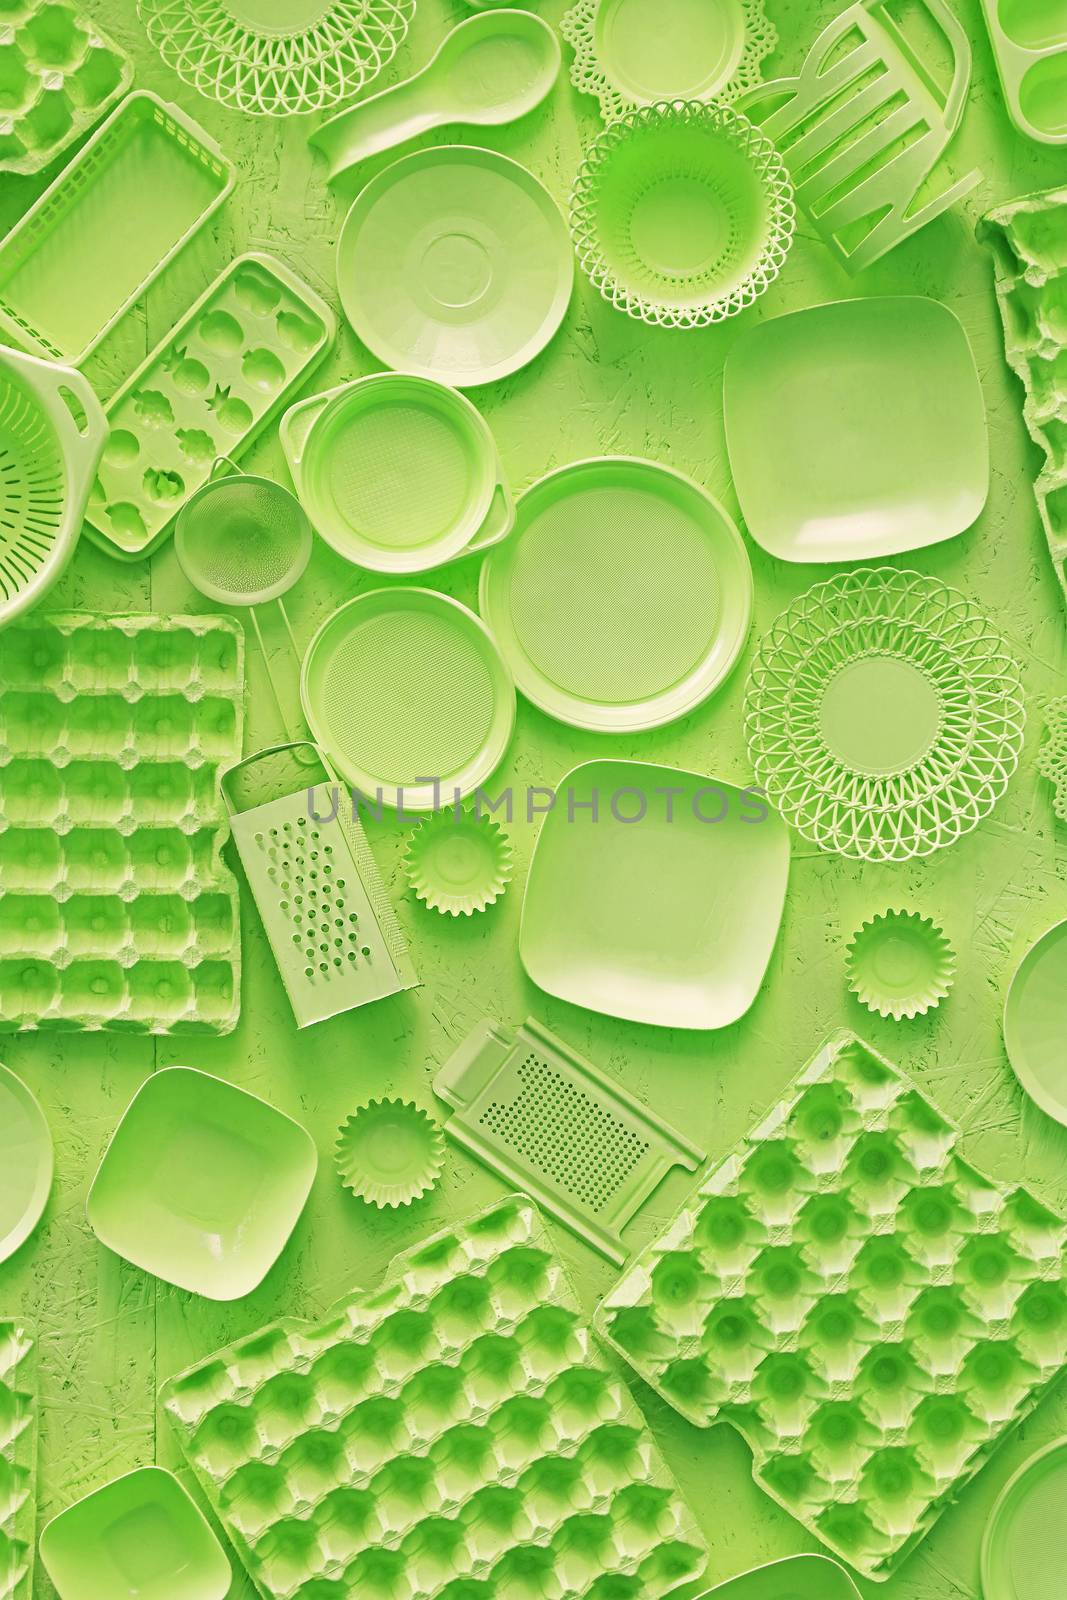 Close up flat lay of different green color painted kitchen utensils and tools, grater, spoon, egg carton, plastic disposable plates, elevated top view, directly above